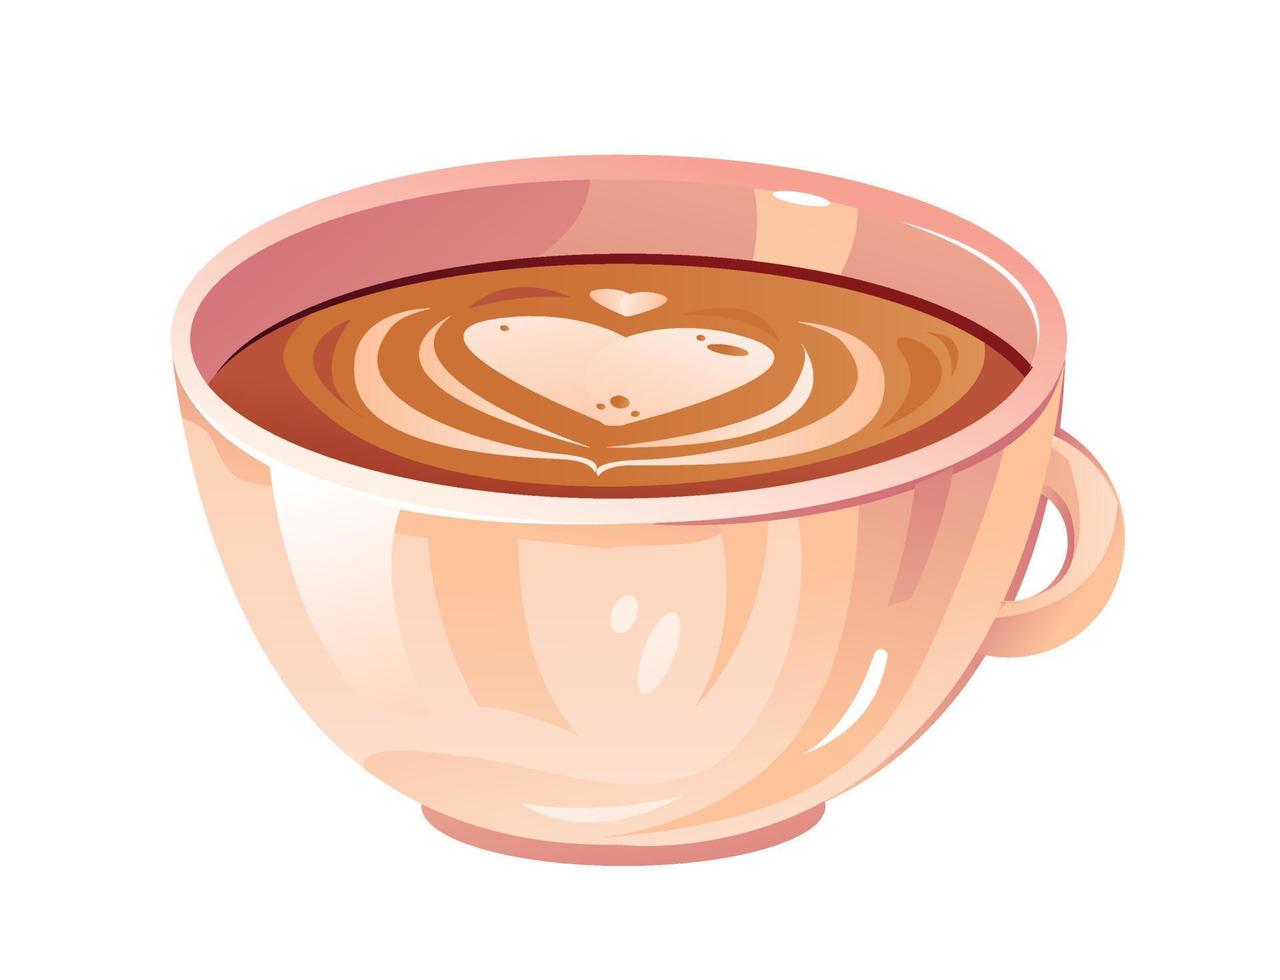 A cup of cappuccino with milk foam in the shape of a heart. A cup of coffee. Cute vector illustration.